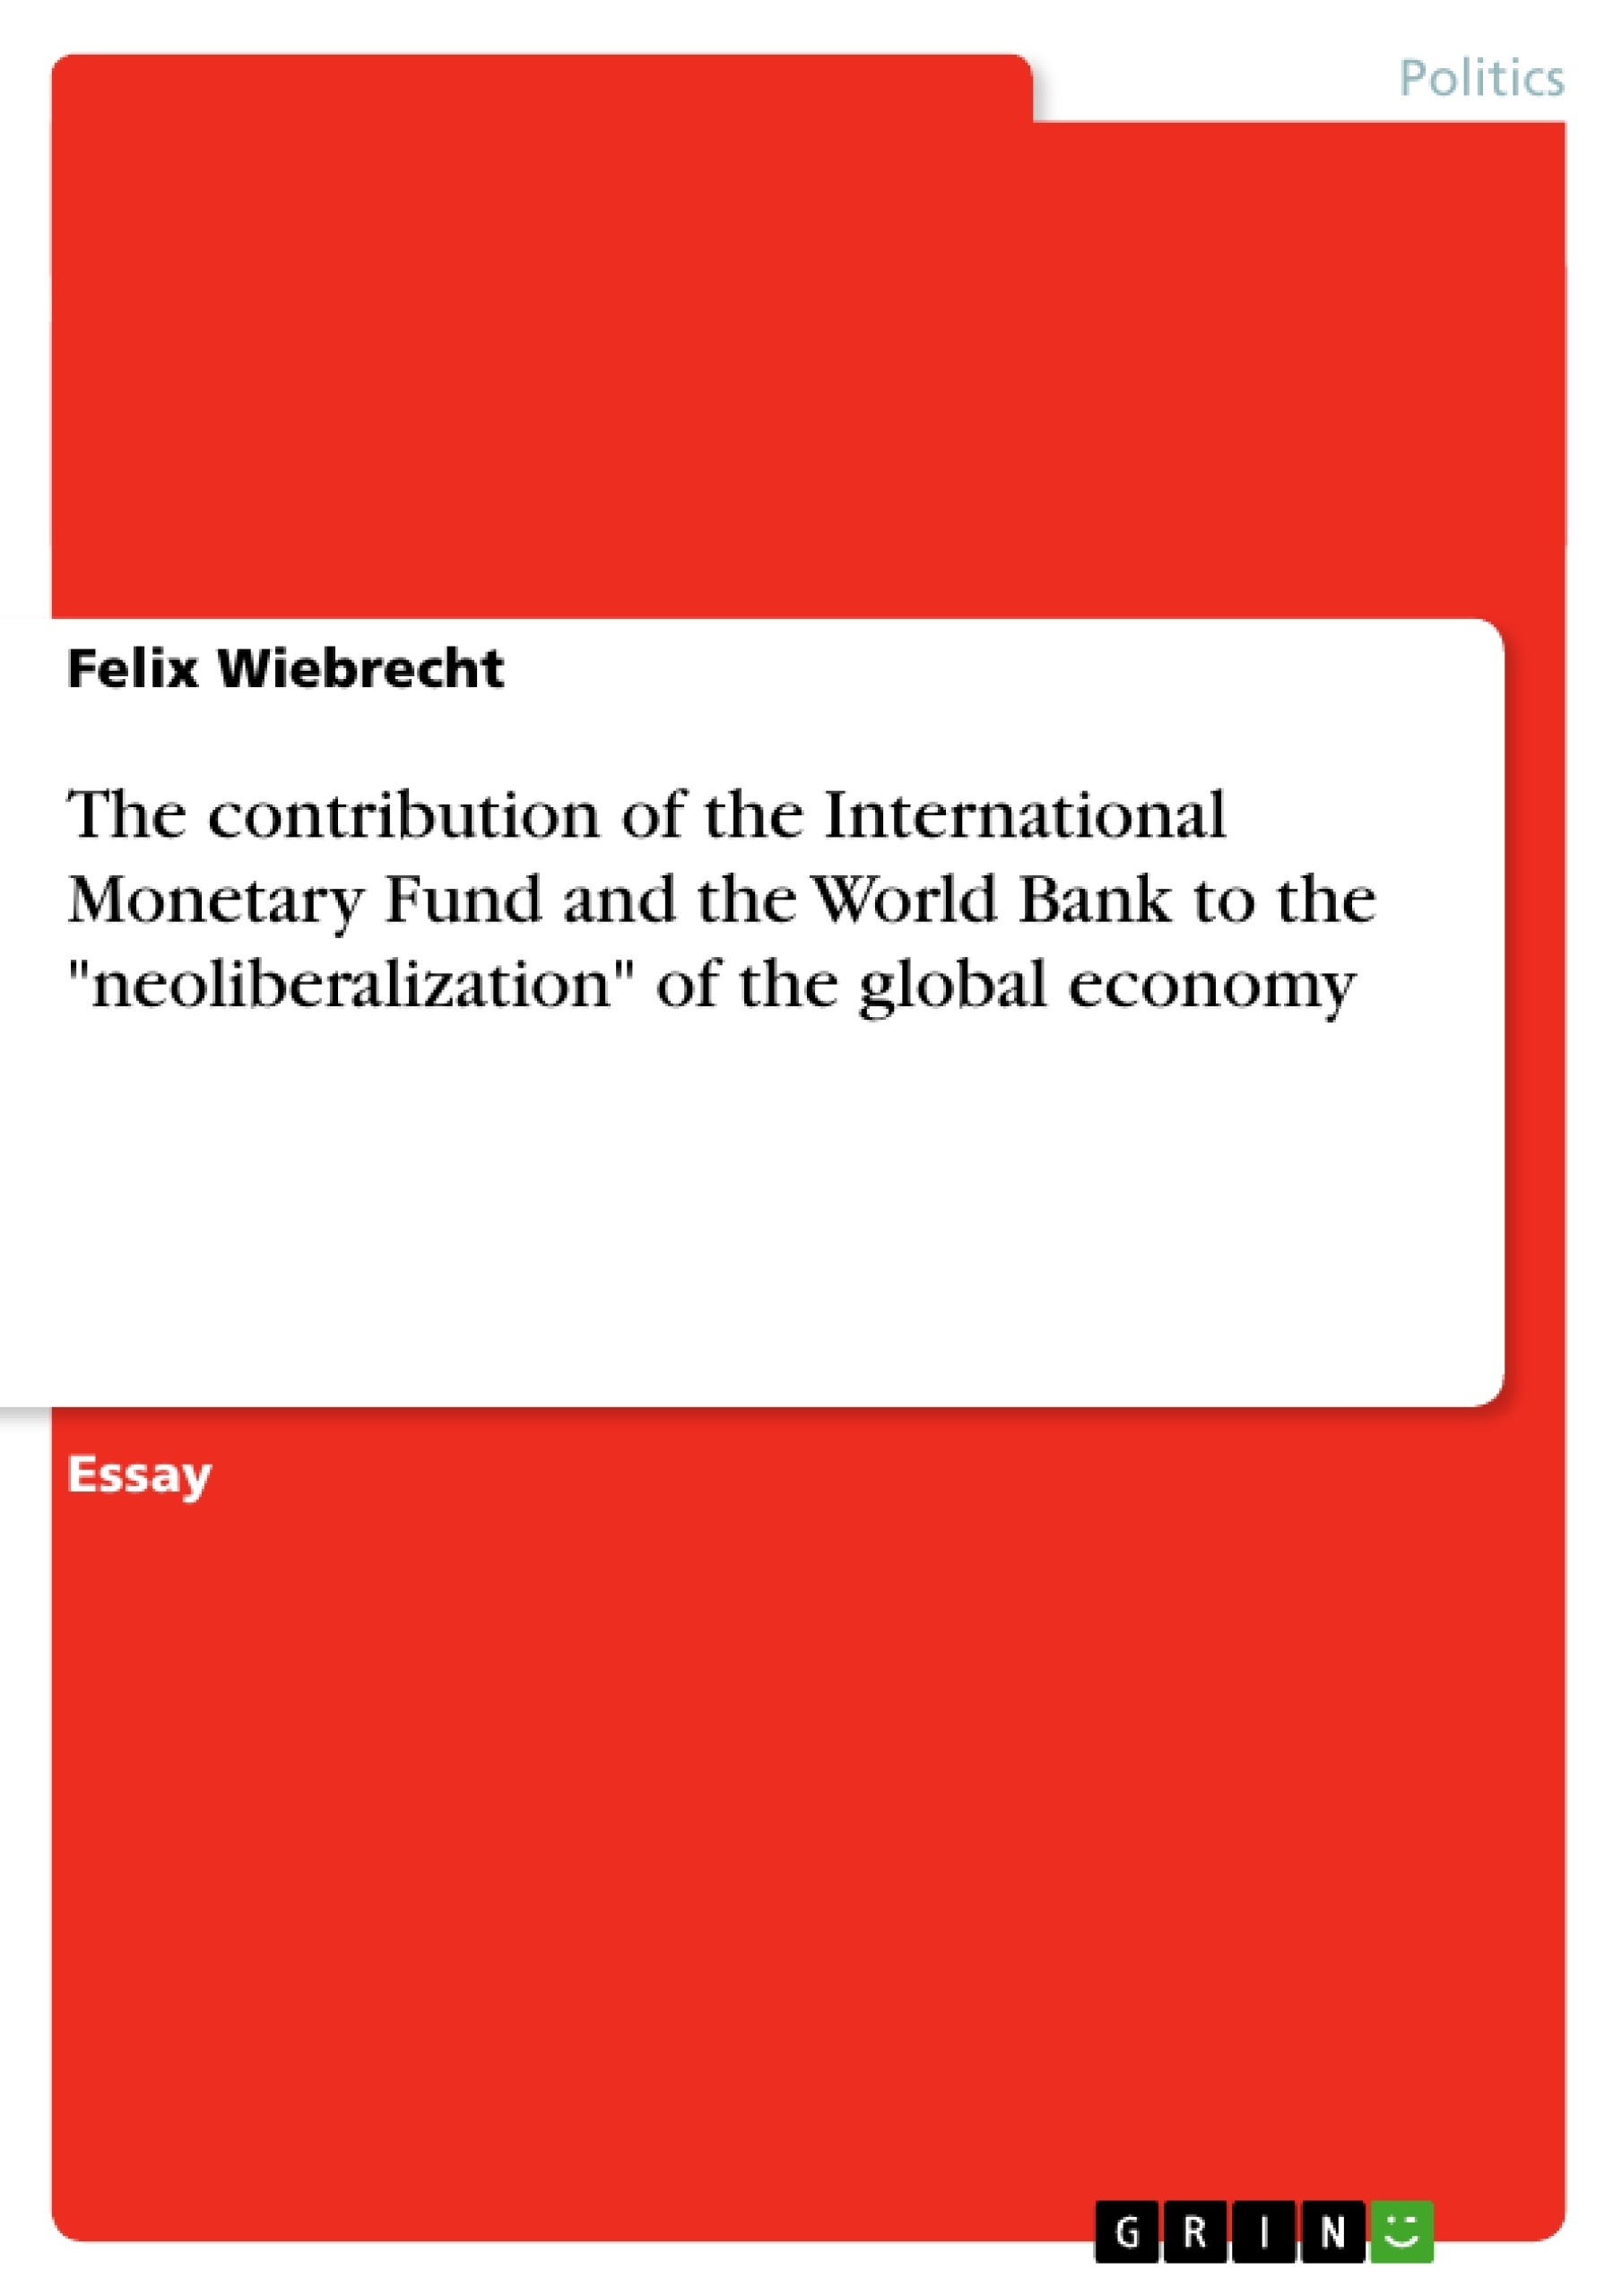 Titel: The contribution of the International Monetary Fund and the World Bank to the "neoliberalization" of the global economy